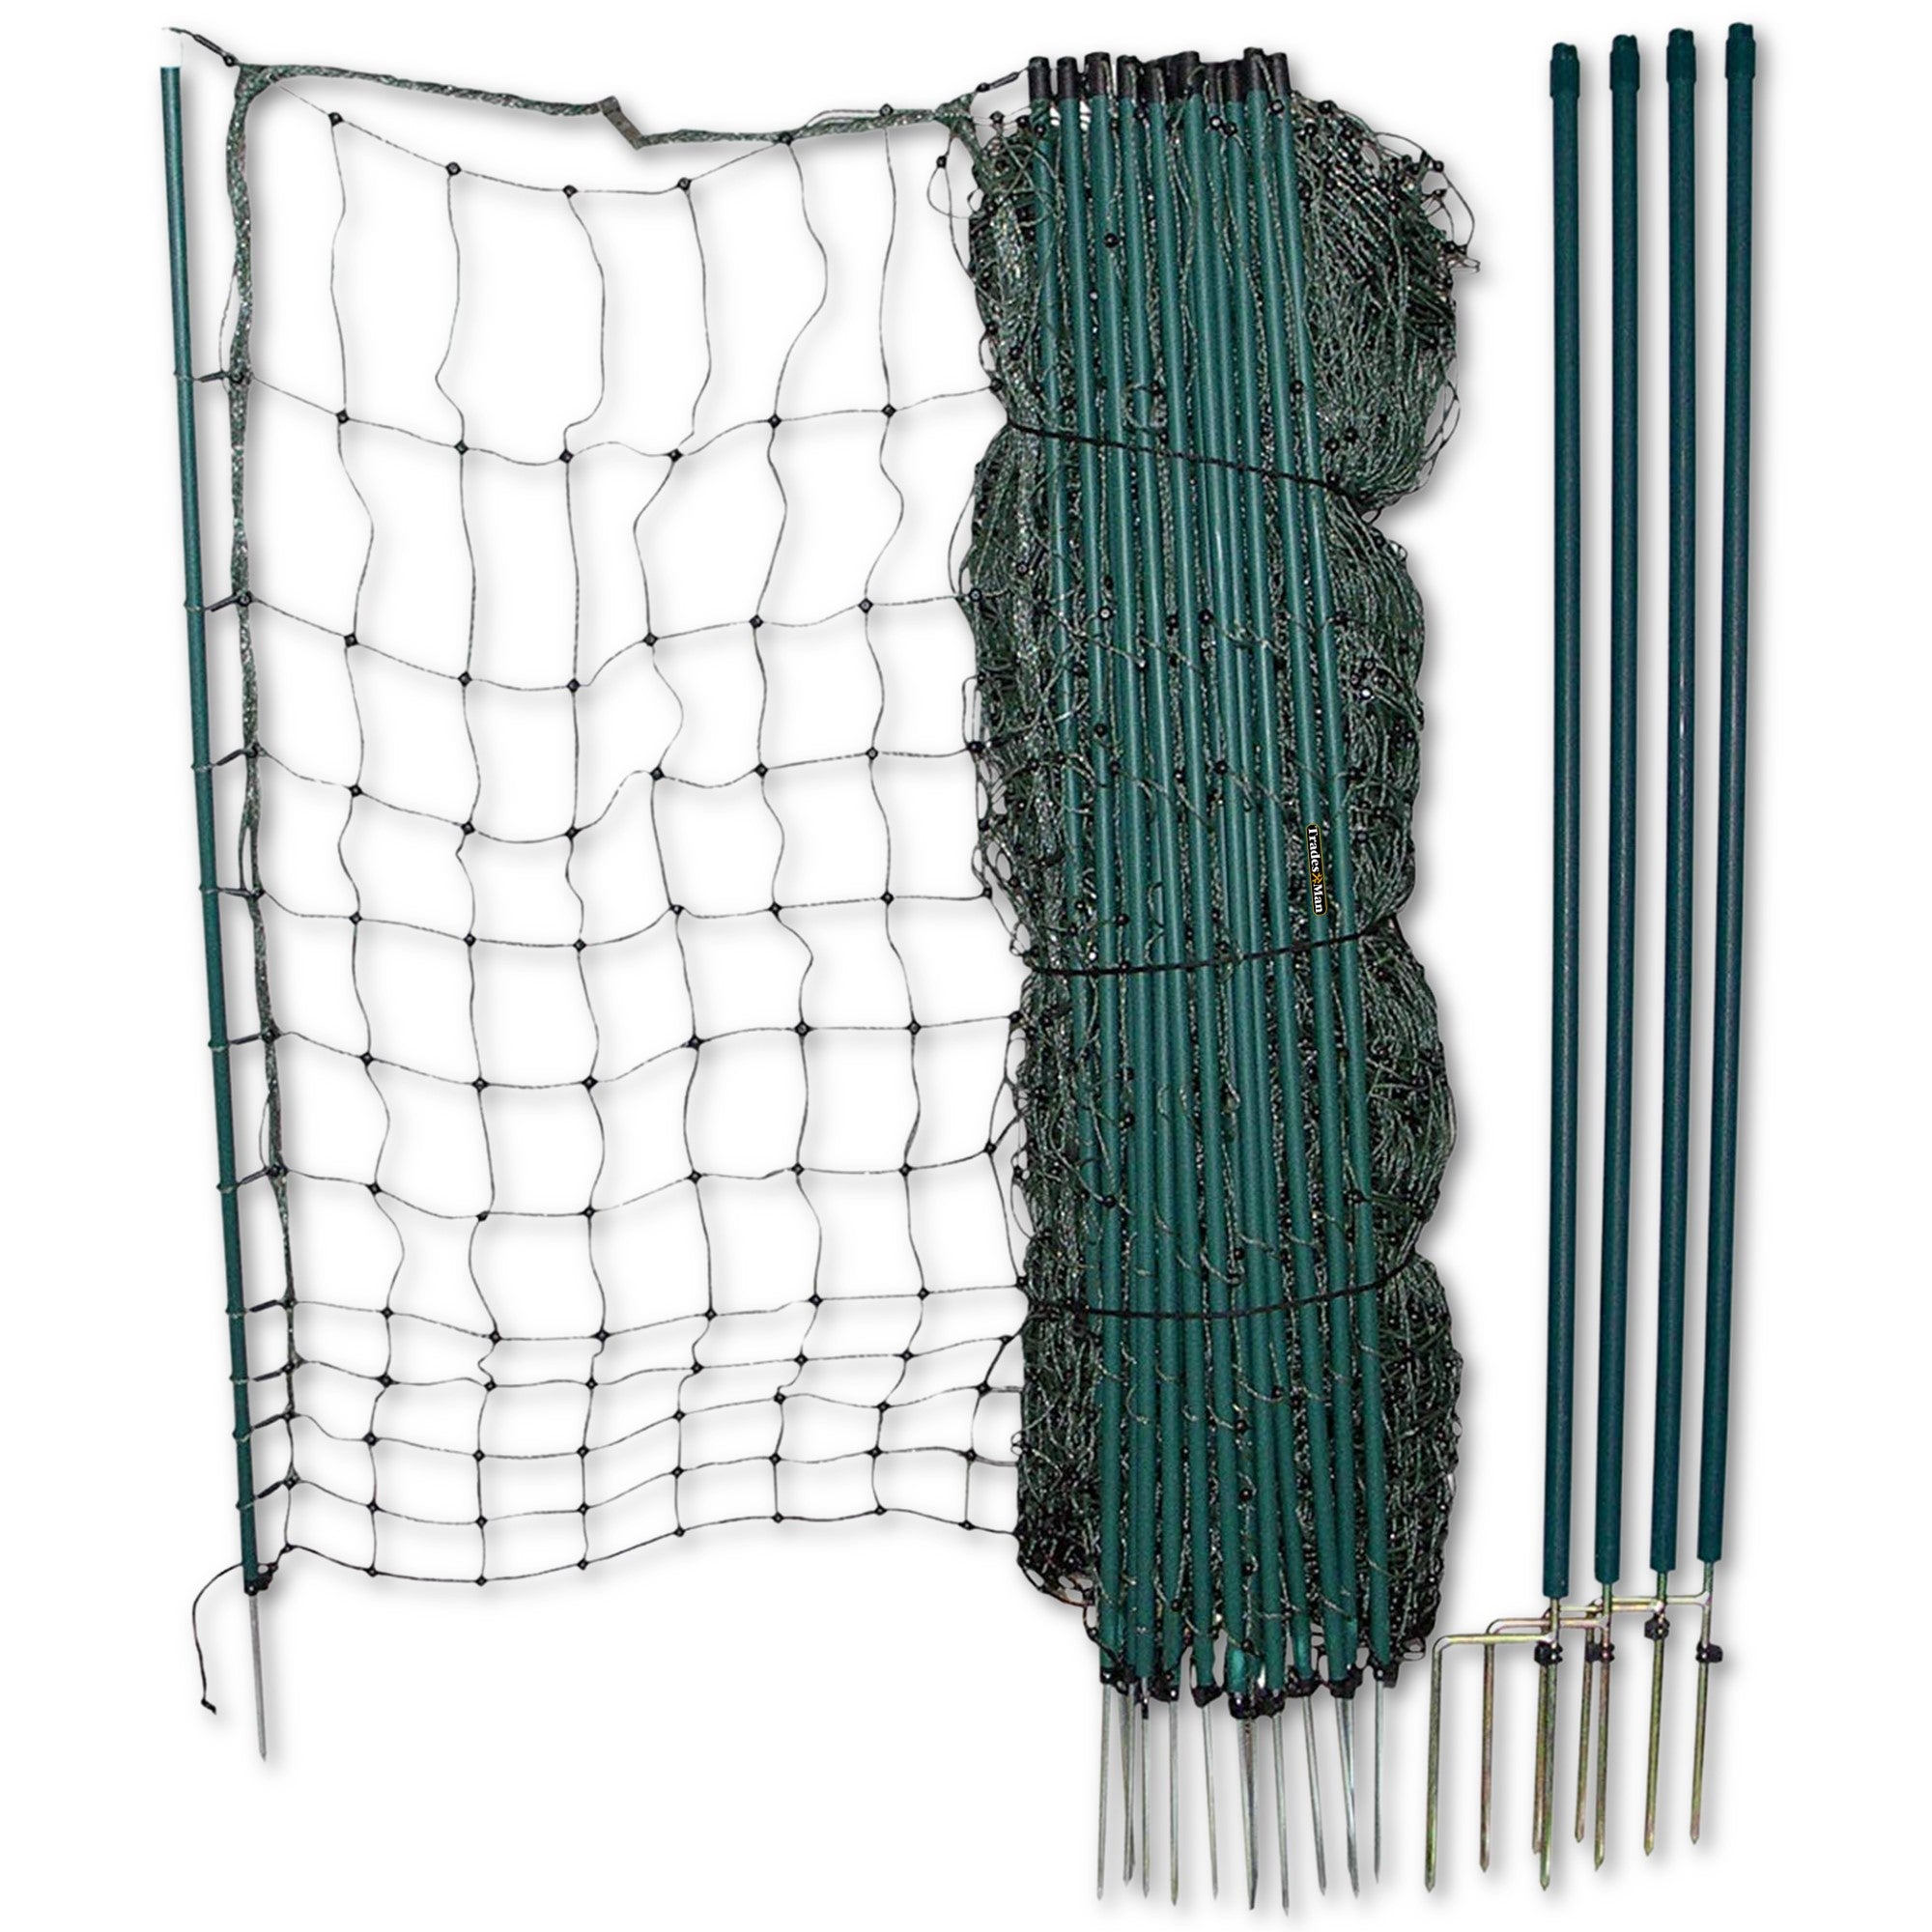 Poultry Fence Top Quality Wired Chicken Netting